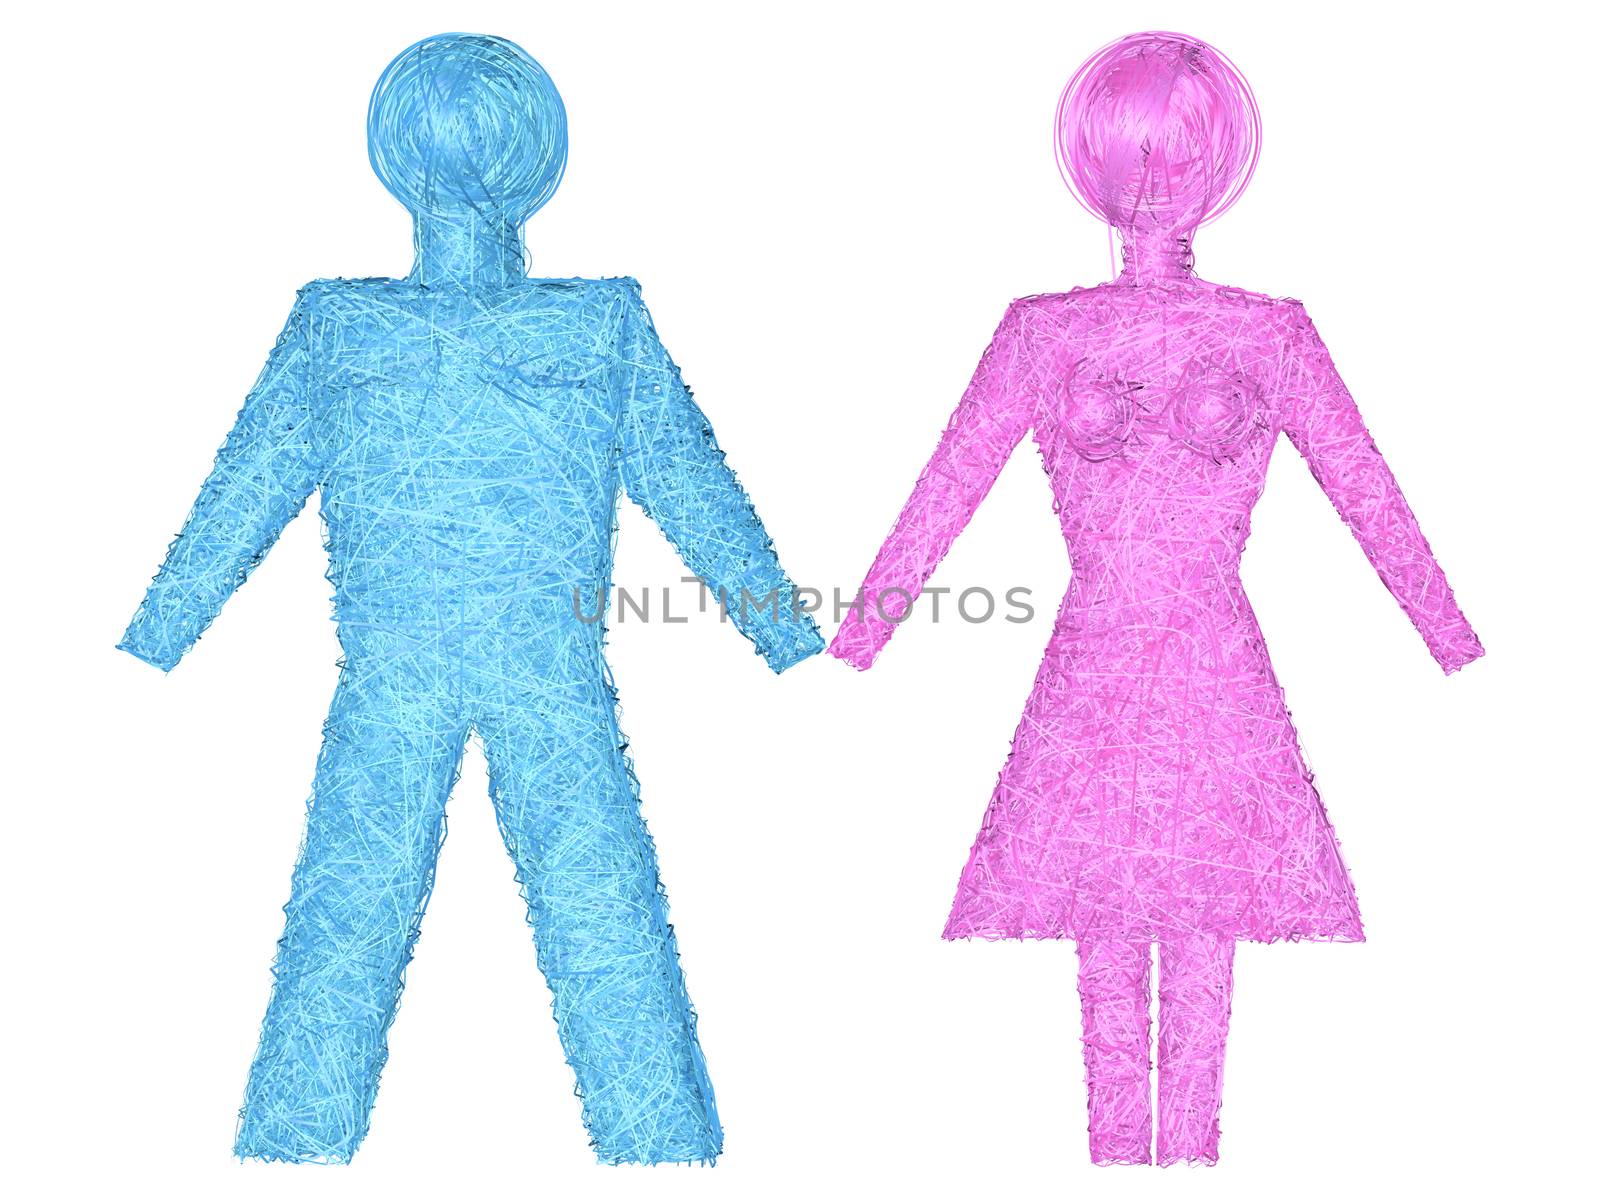 Male and female shapes composed of blue and pink stripes by oneo